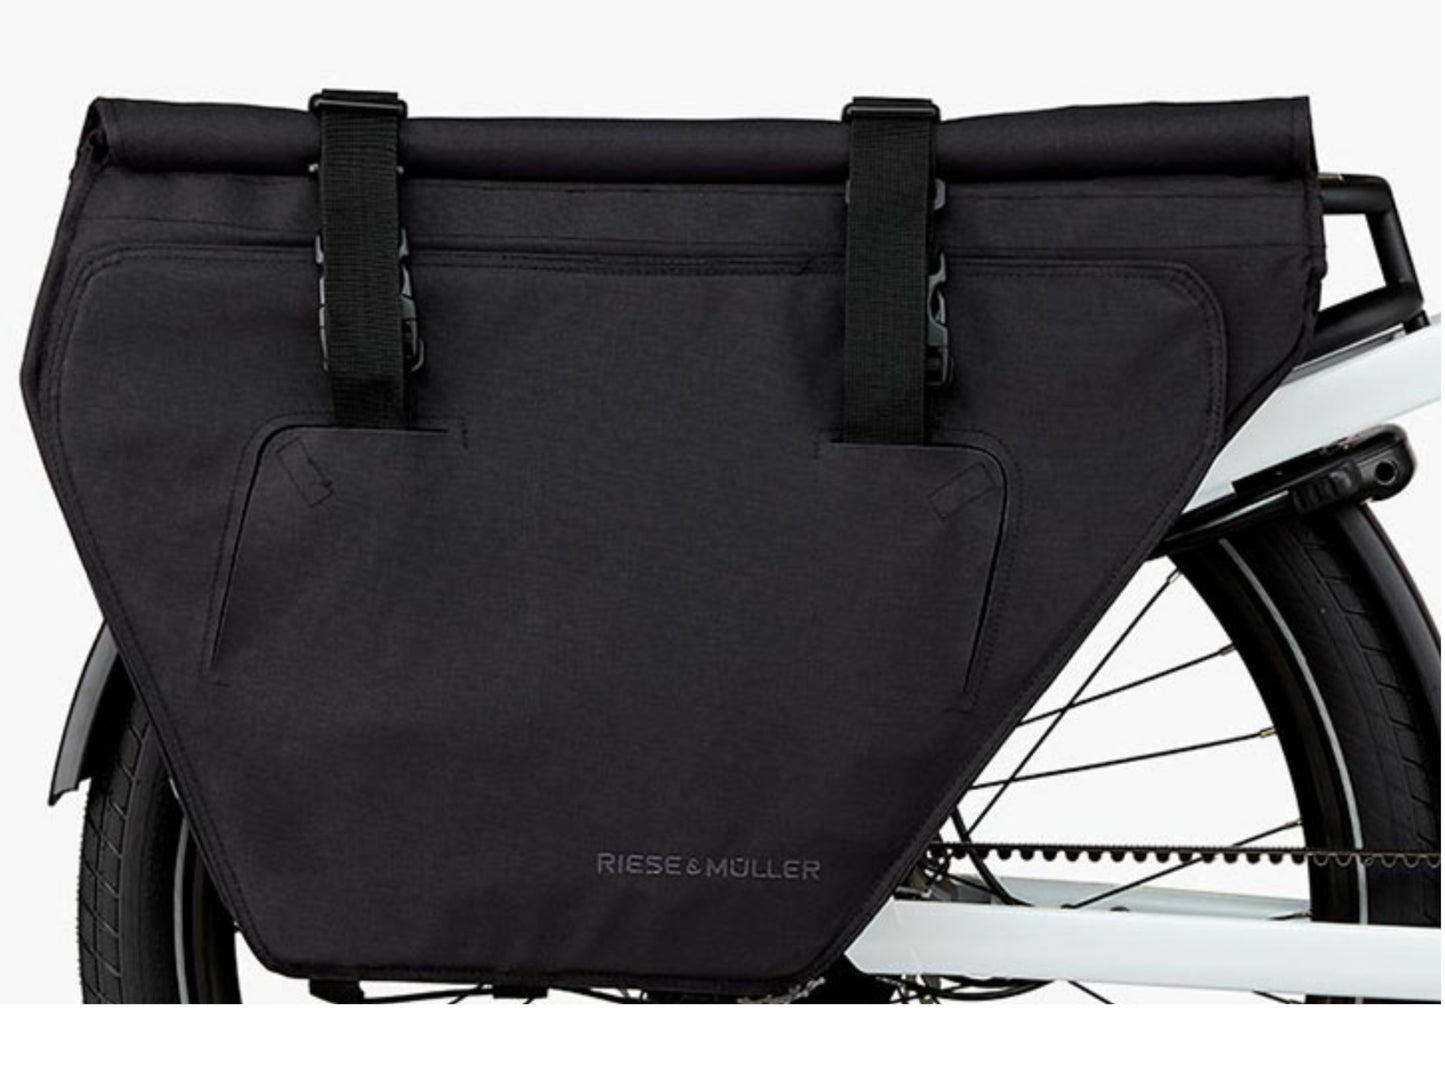 Riese and Muller Multicharger Mixte GT Vario 750 emtb hardtail close up rear cargo bags